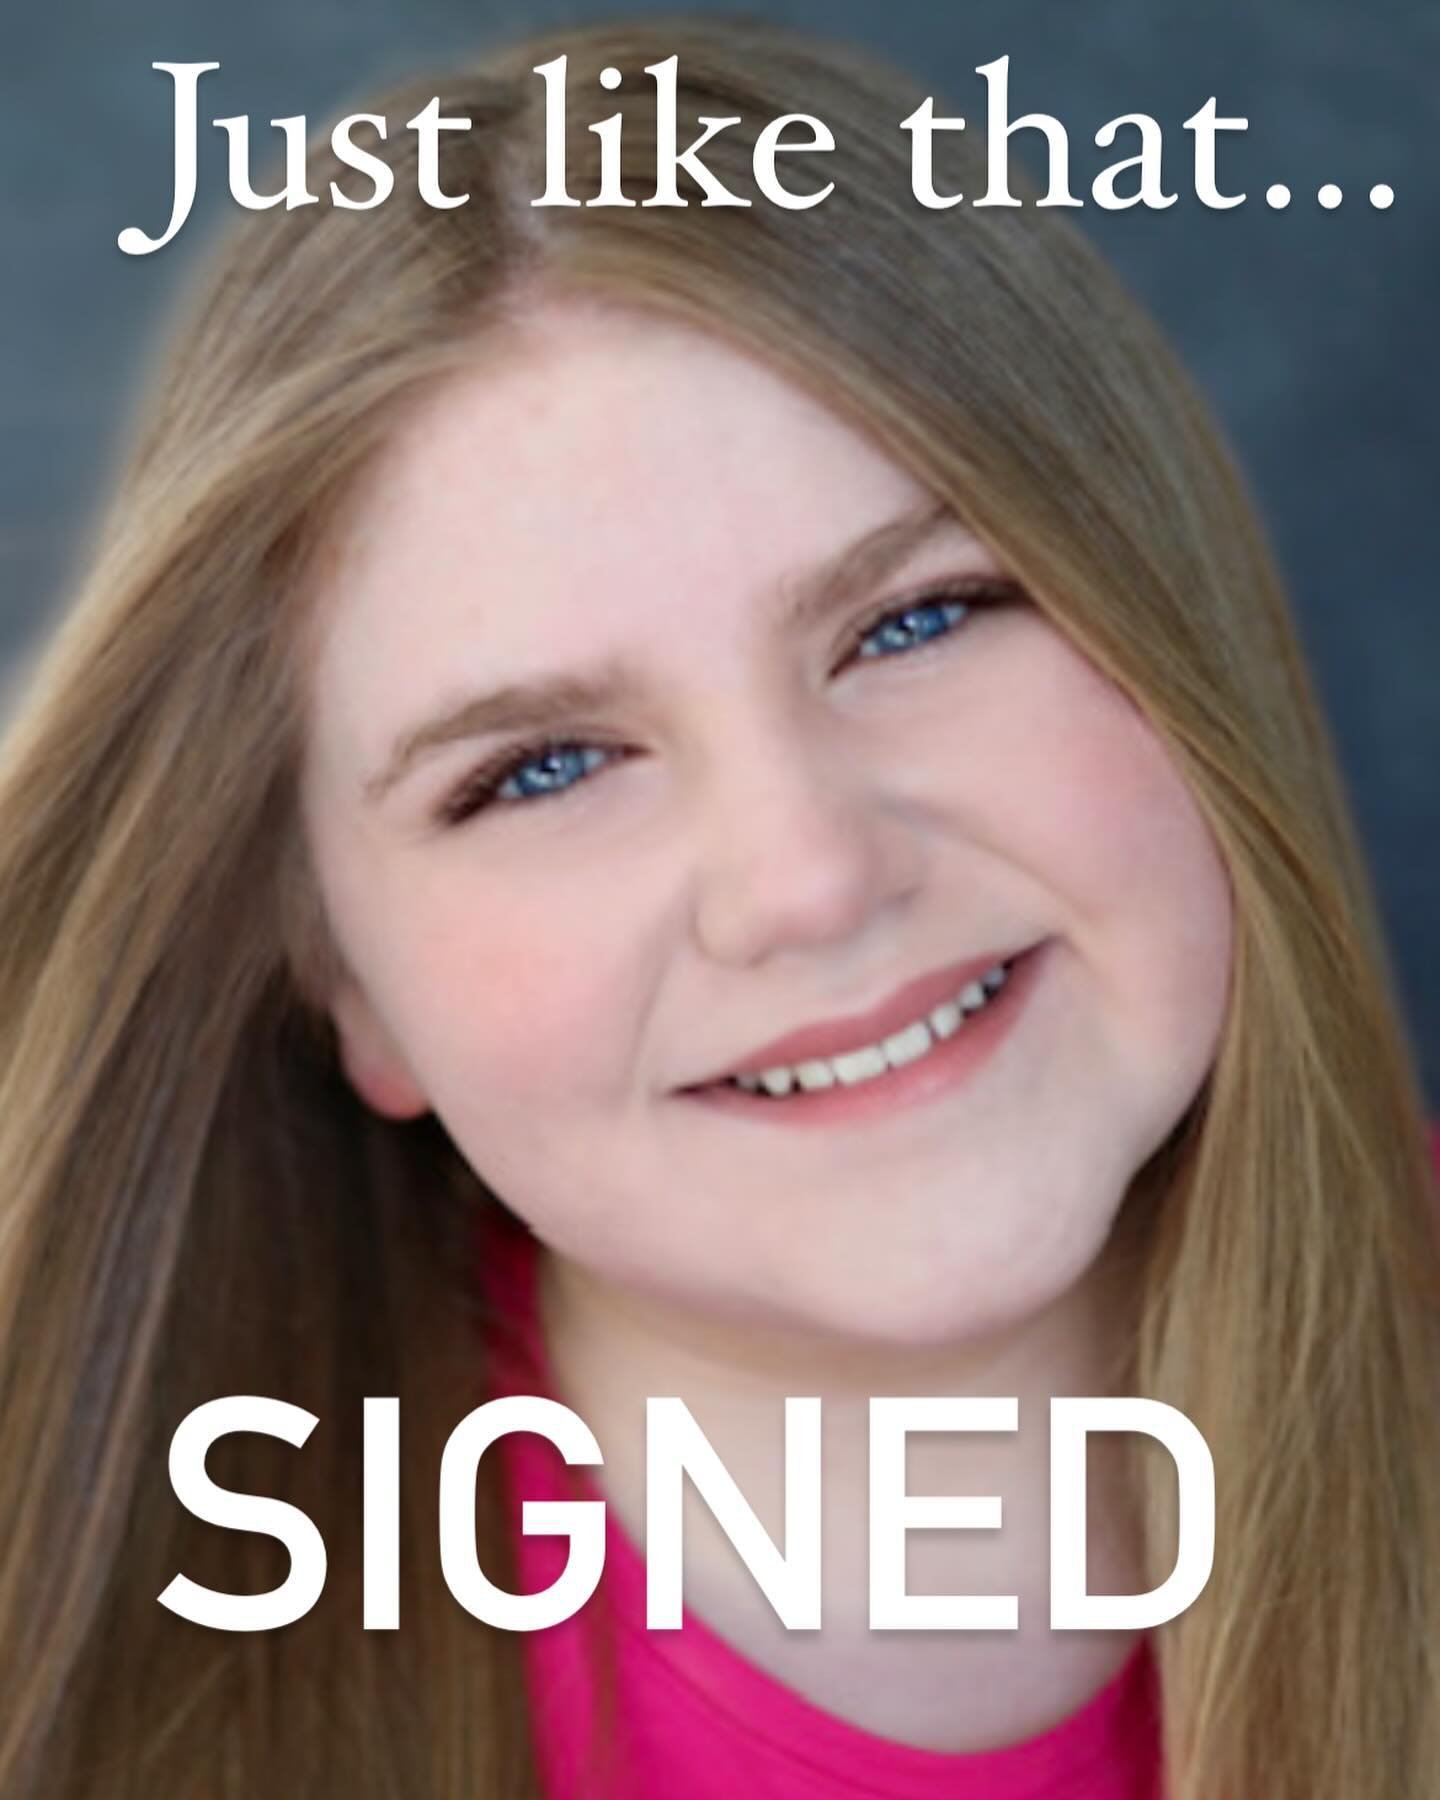 So proud of our newcomer @charlotterlombard for signing with @ct_kids_talent! So excited to be here for the journey. Let's do this!!!

#bookedbookers #bookedfamily #bookedbymichelle #proudcoach